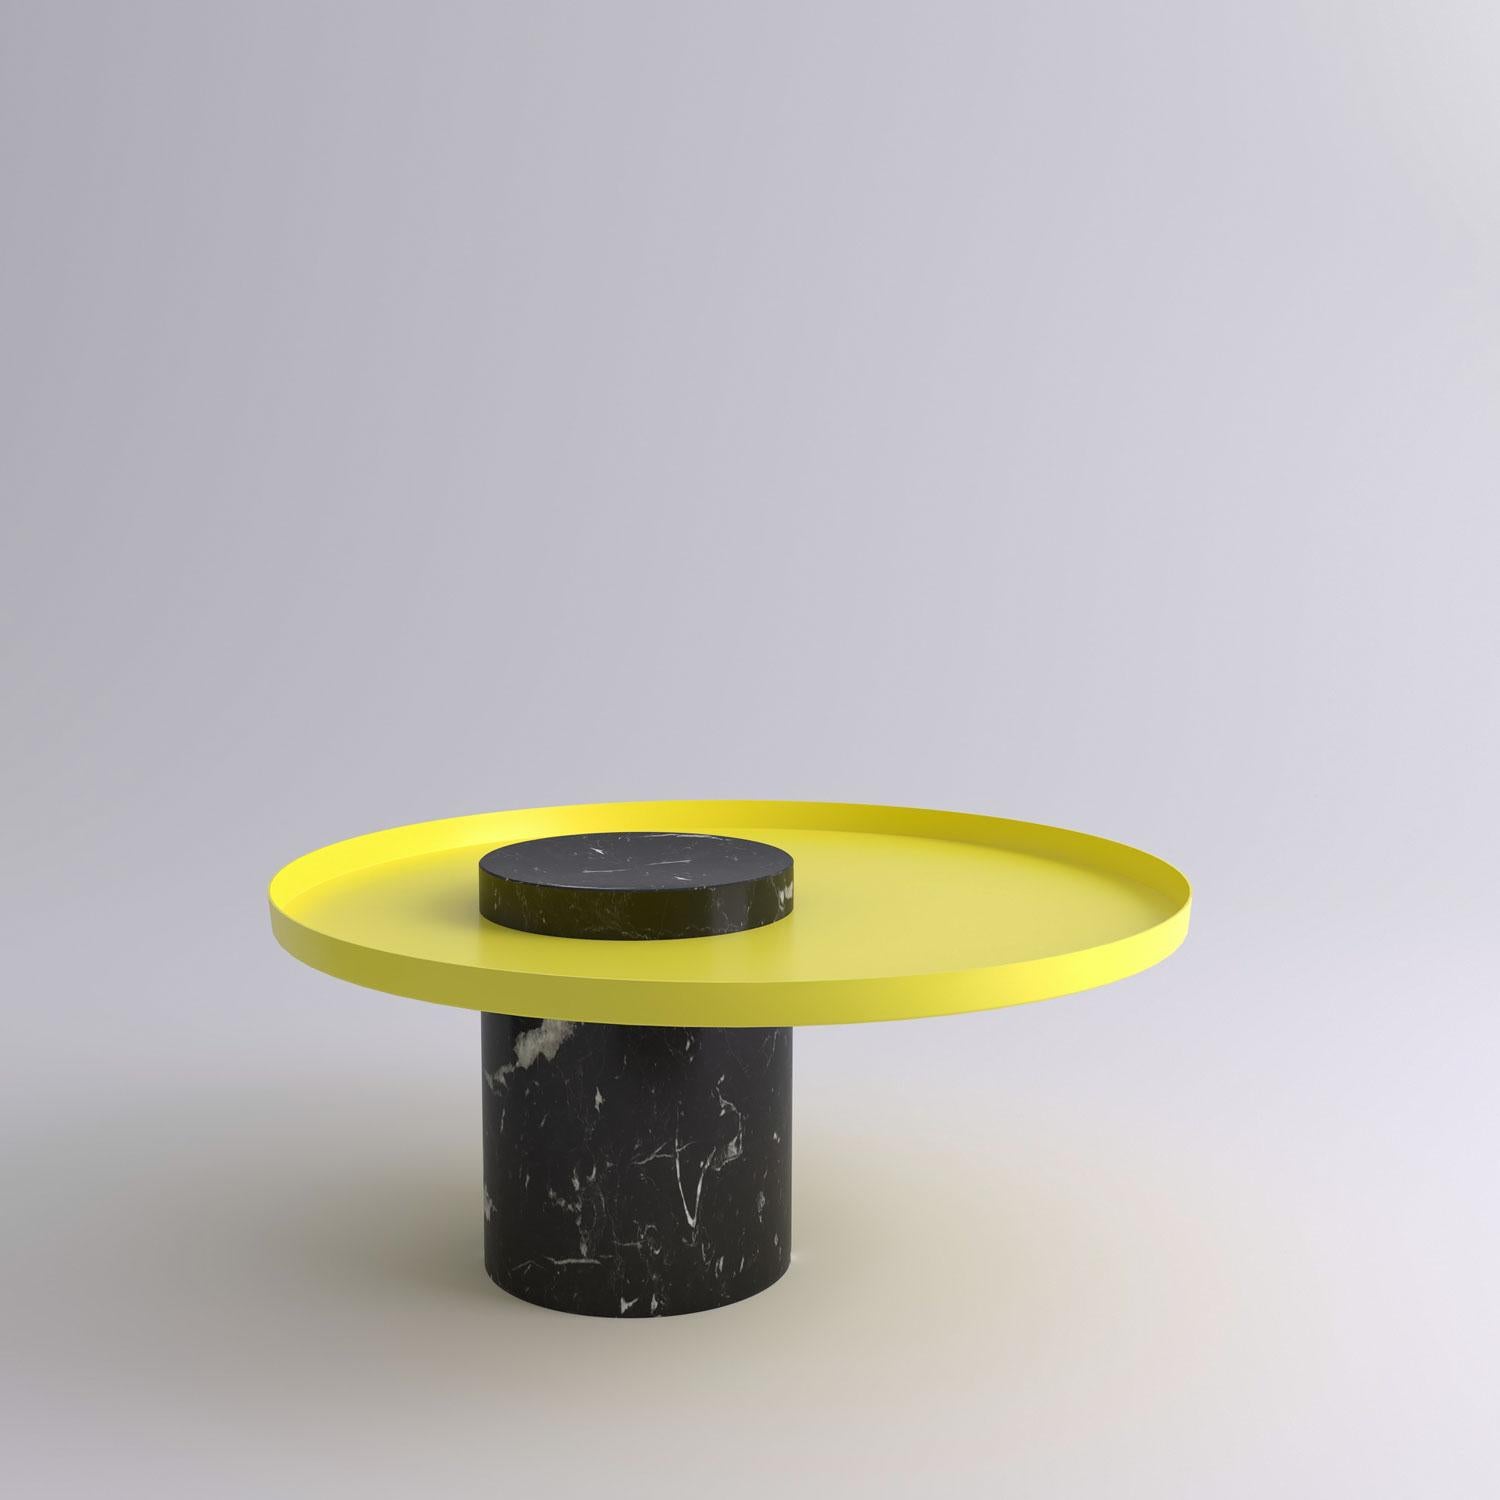 Low black marquina marble contemporary guéridon, Sebastian Herkner
Dimensions: D 70 x H 33 cm
Materials: Black Marquina marble, yellow metal tray

The salute table exists in 3 sizes, 4 different marble stones for the column and 5 different